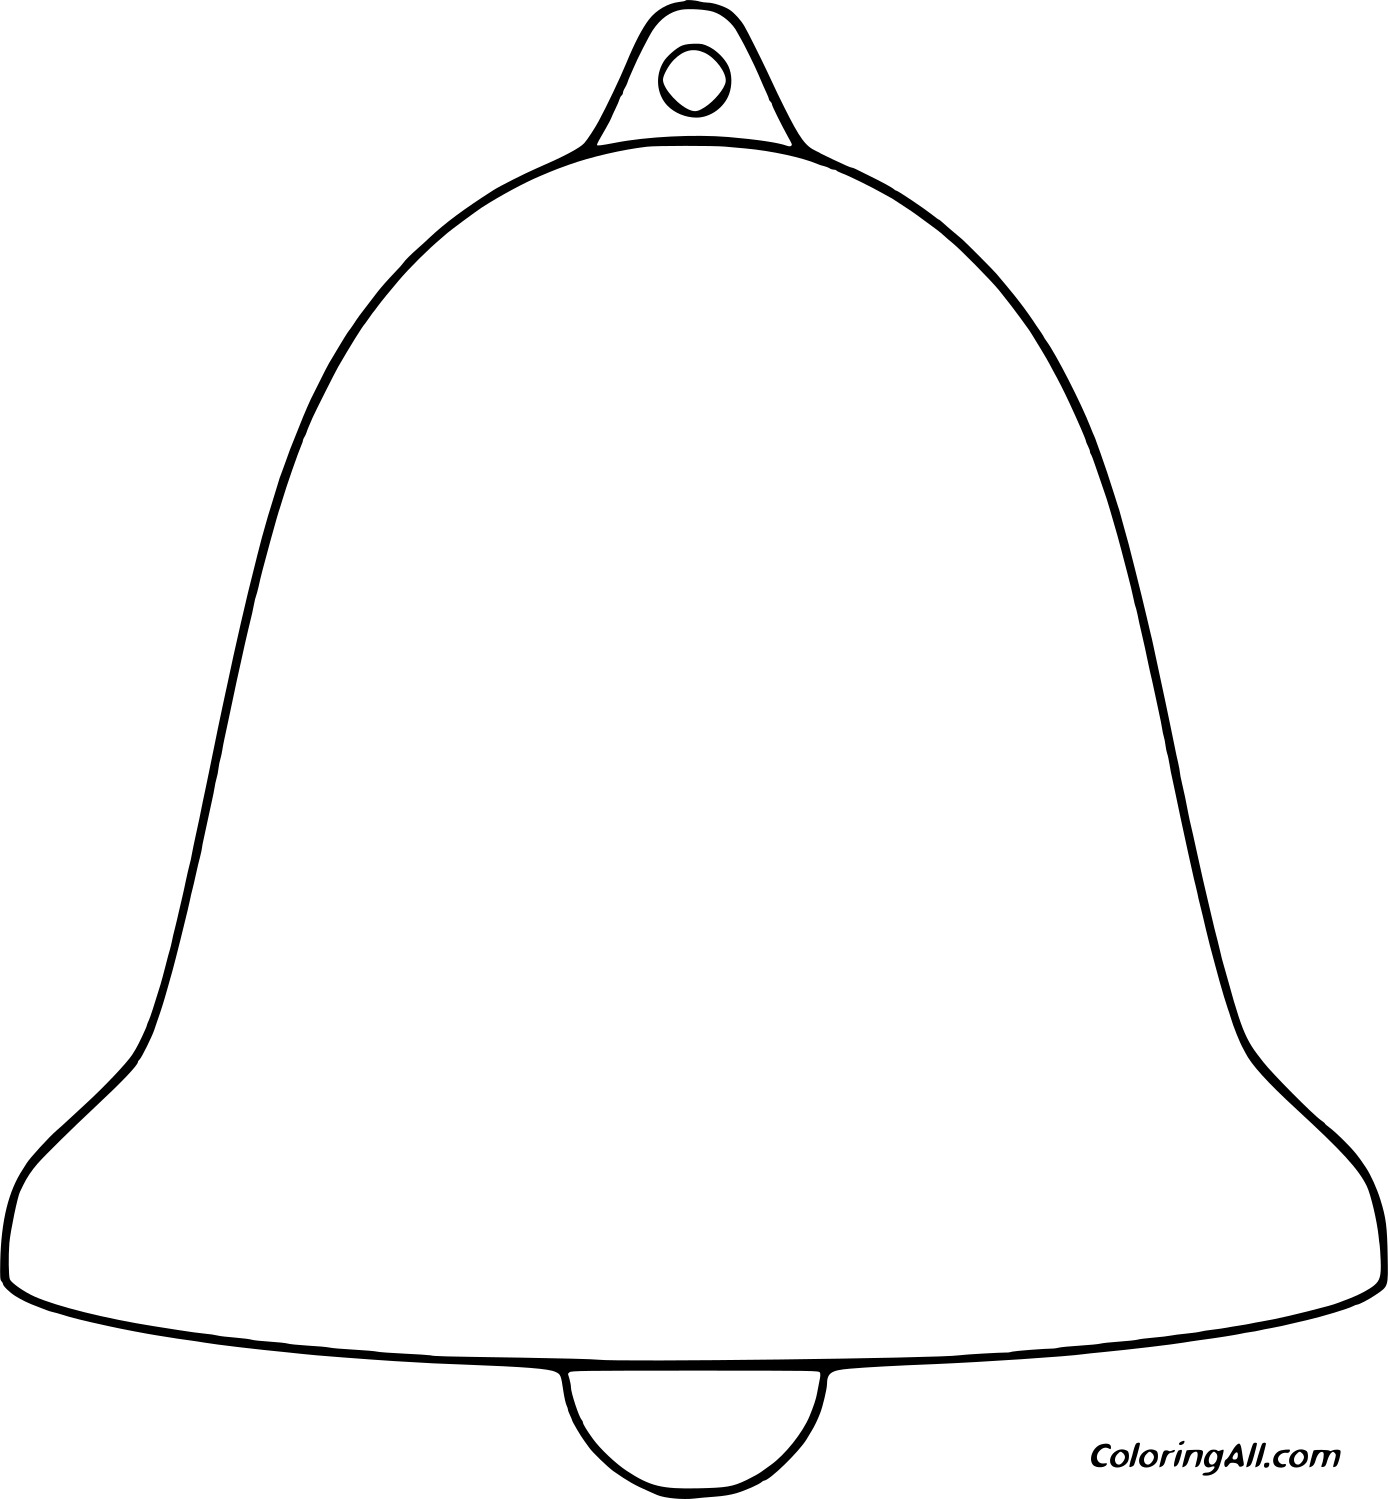 Blank Jingle Bell Image For Kids Coloring Page